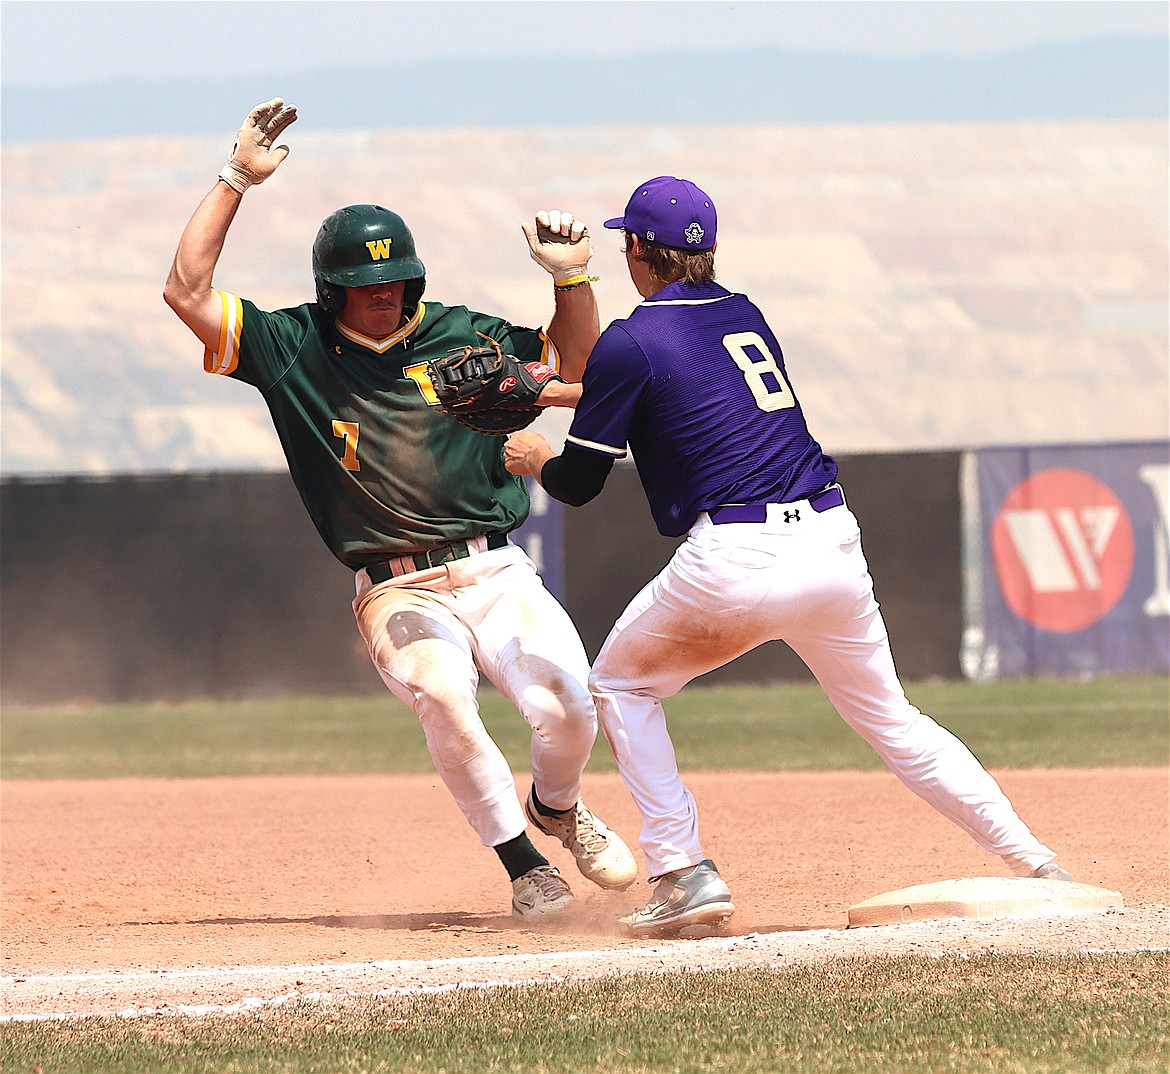 Pirate Jarrett Wilson nails another out against Whitefish during Saturday's championship game in Butte. (Niki Graham photo)